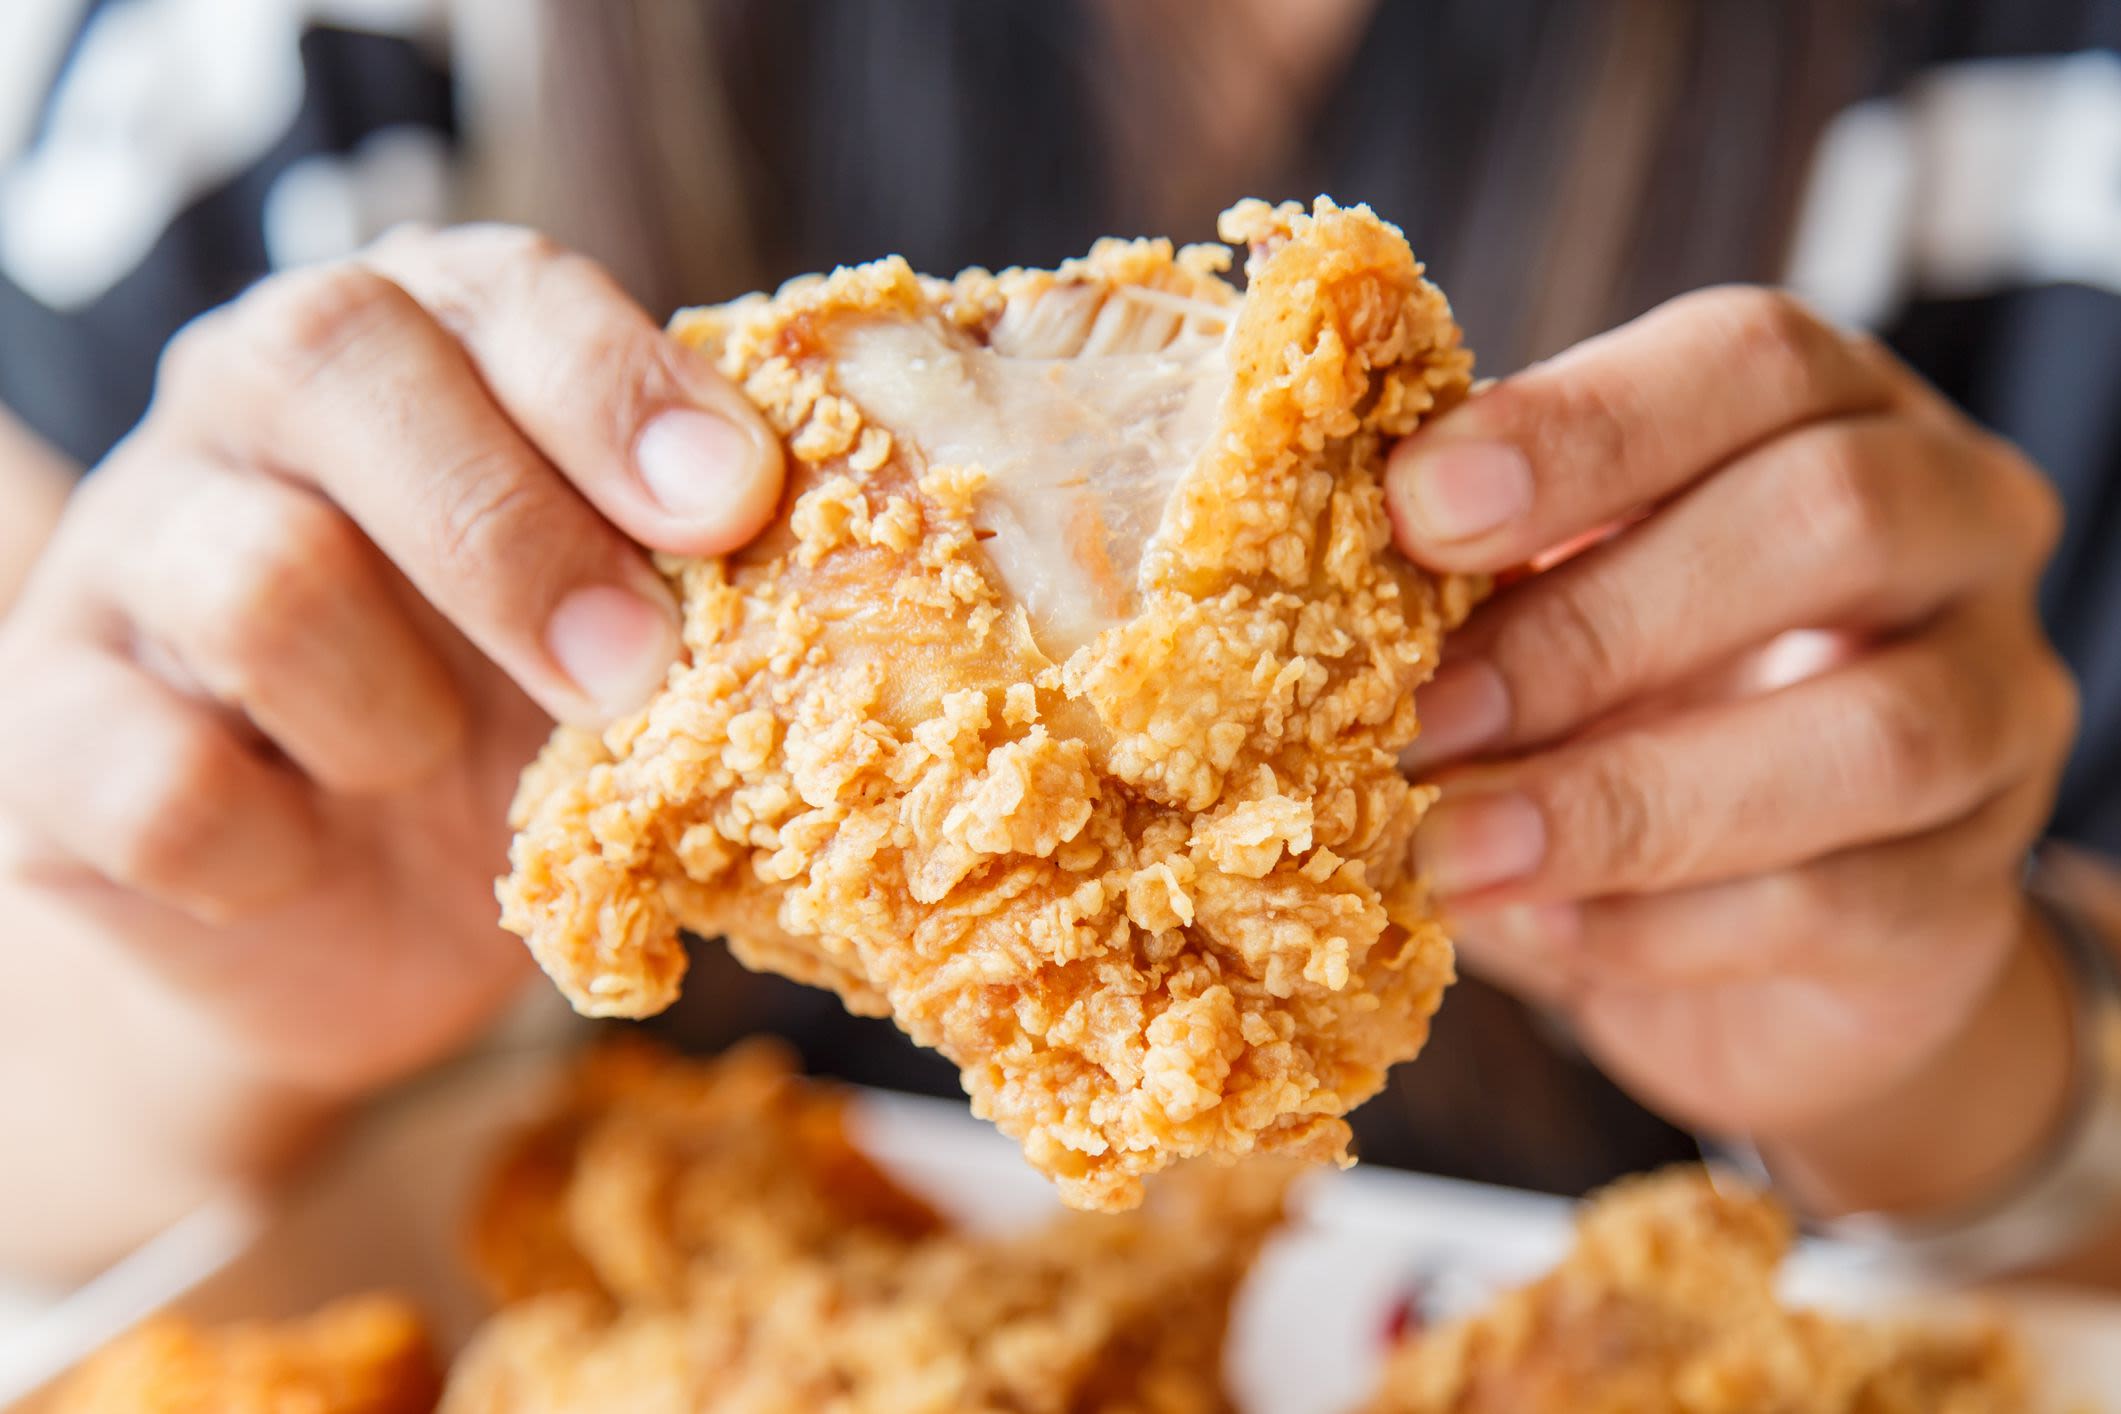 Where to Find the Best Hole-in-the-Wall Fried Chicken in America